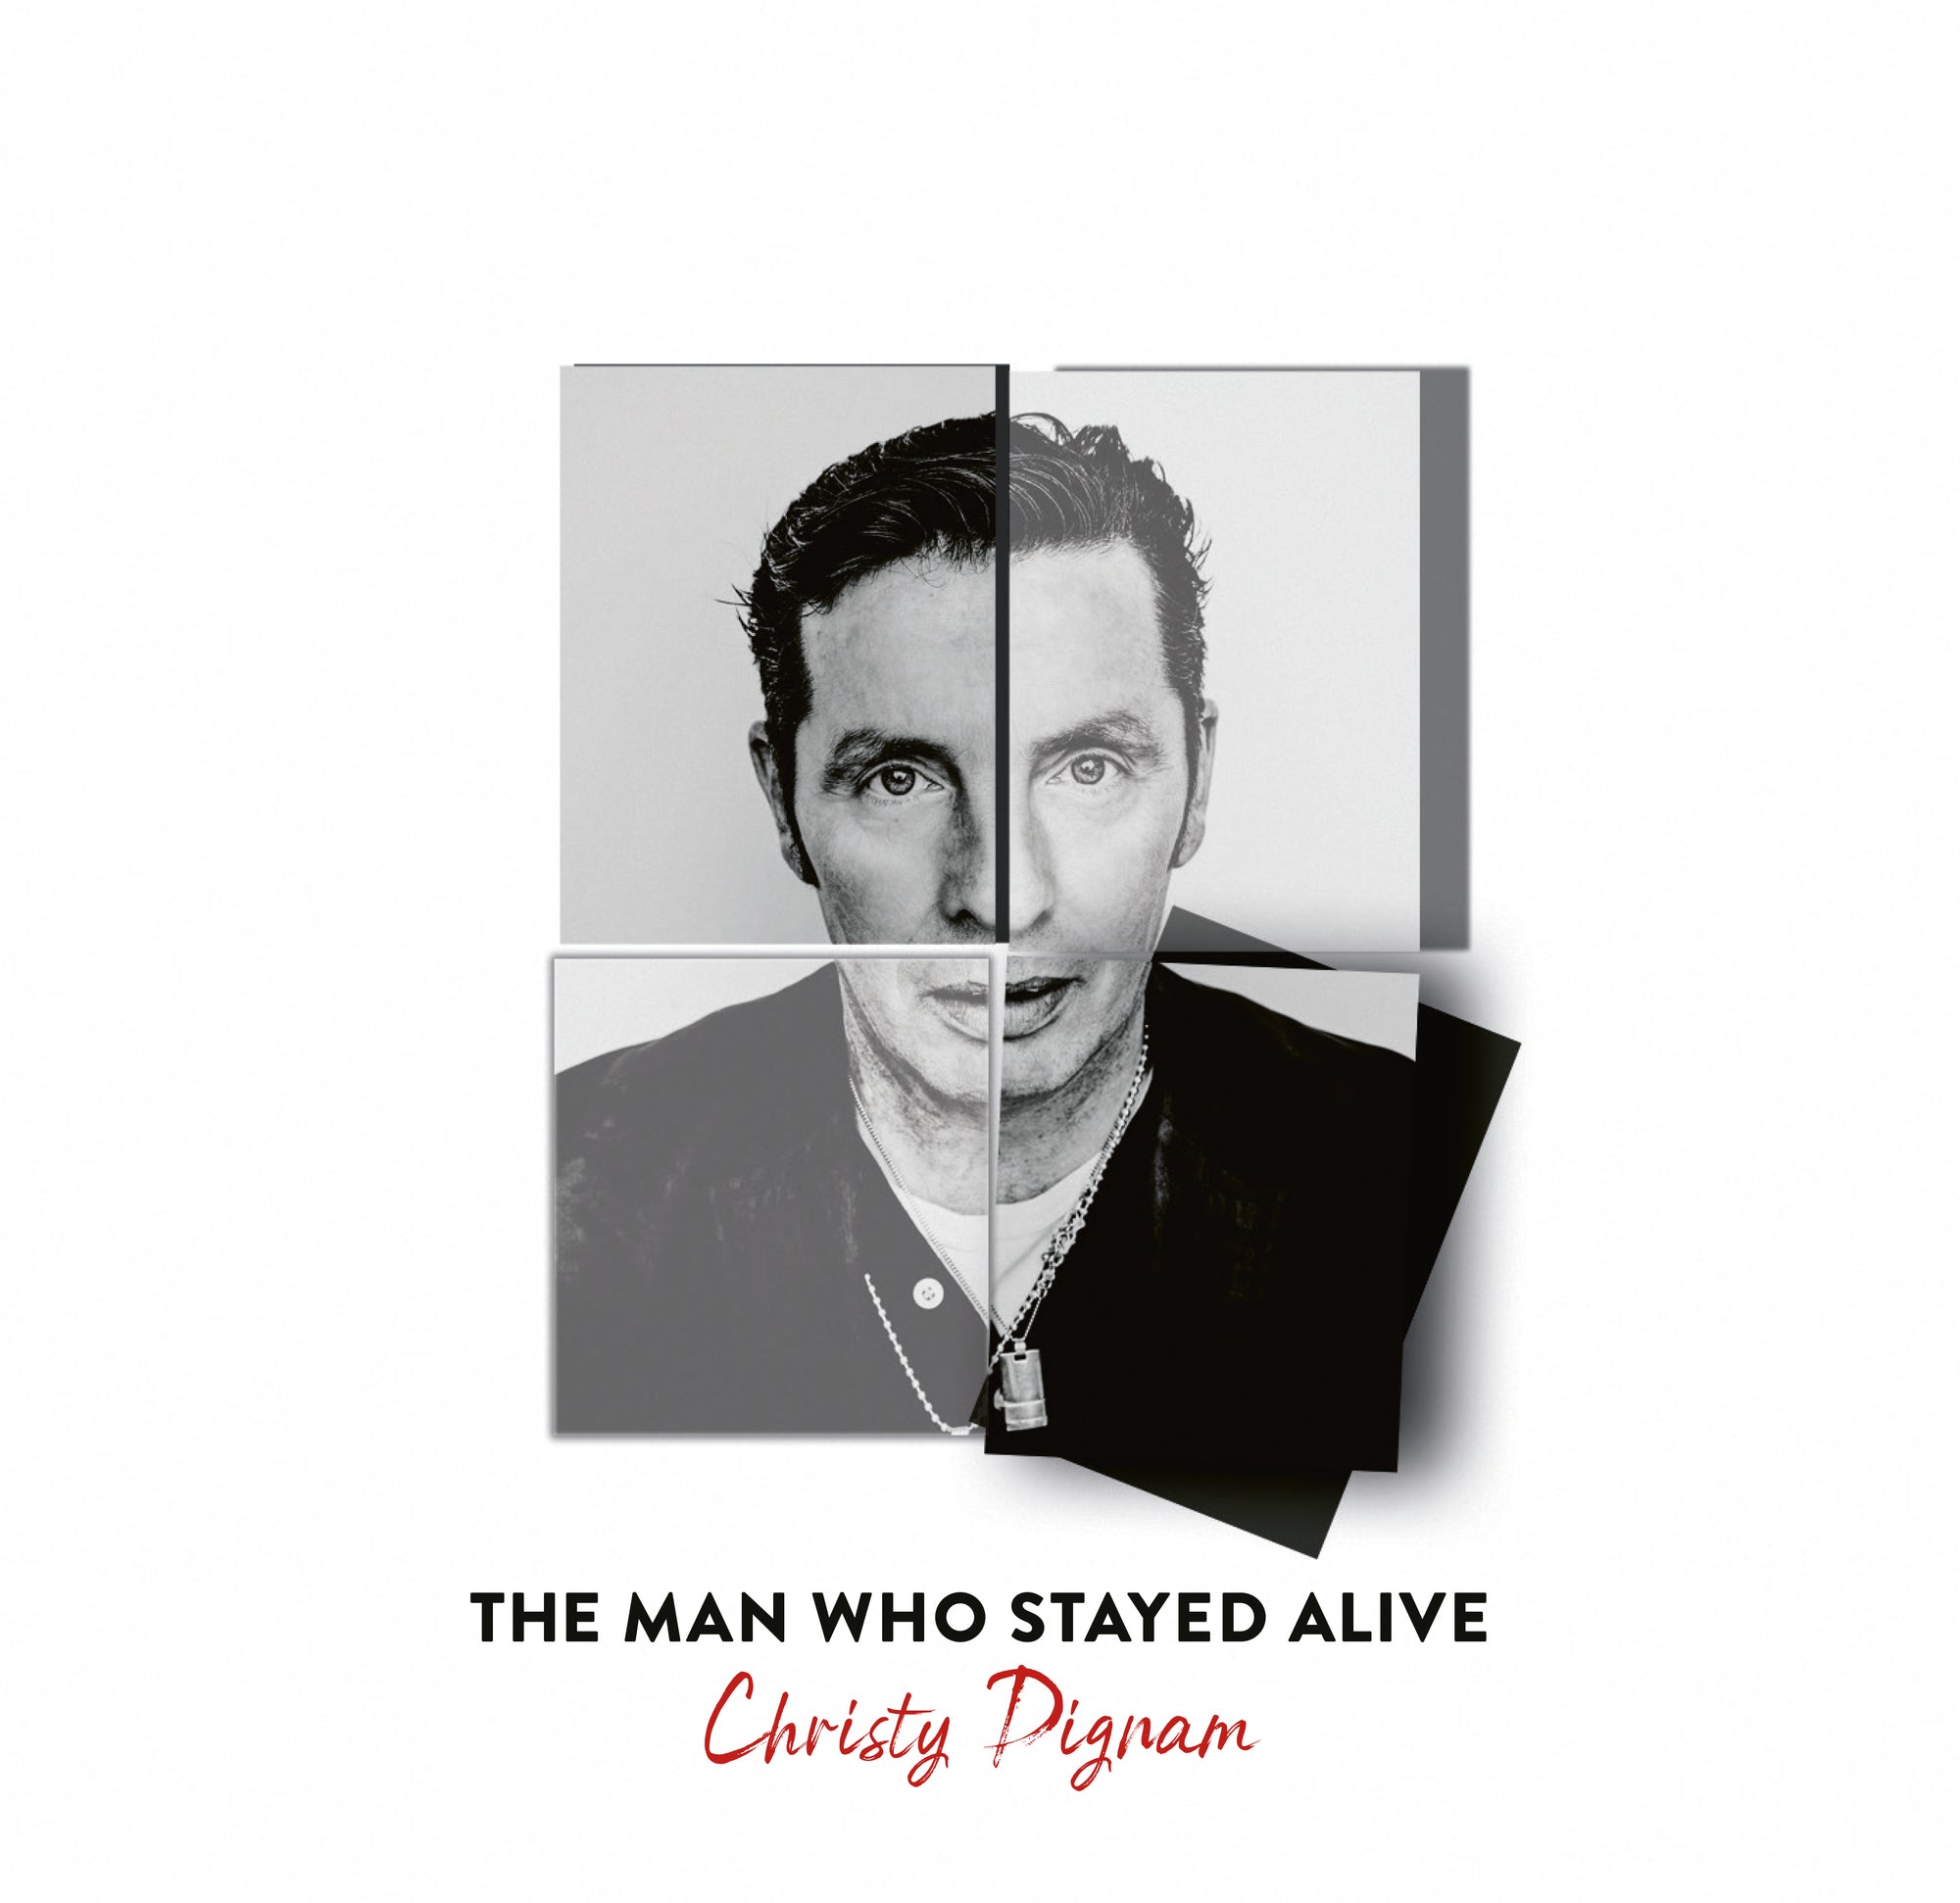 Christy Dignam - The Man Who Stayed Alive [Digital Download]